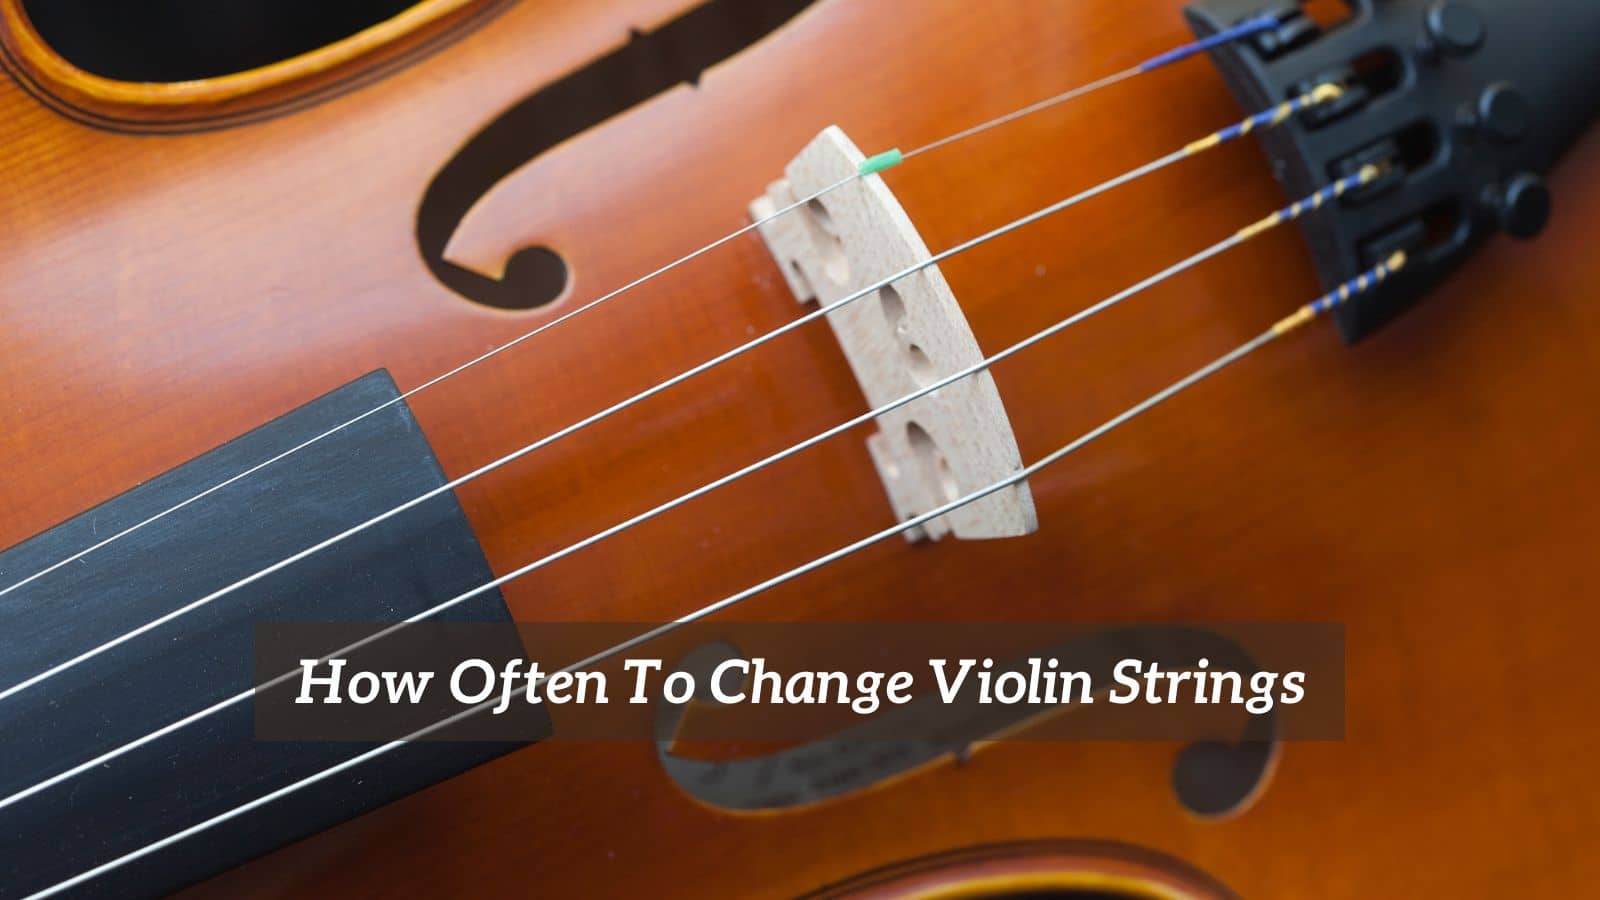 How Often To Change Violin Strings